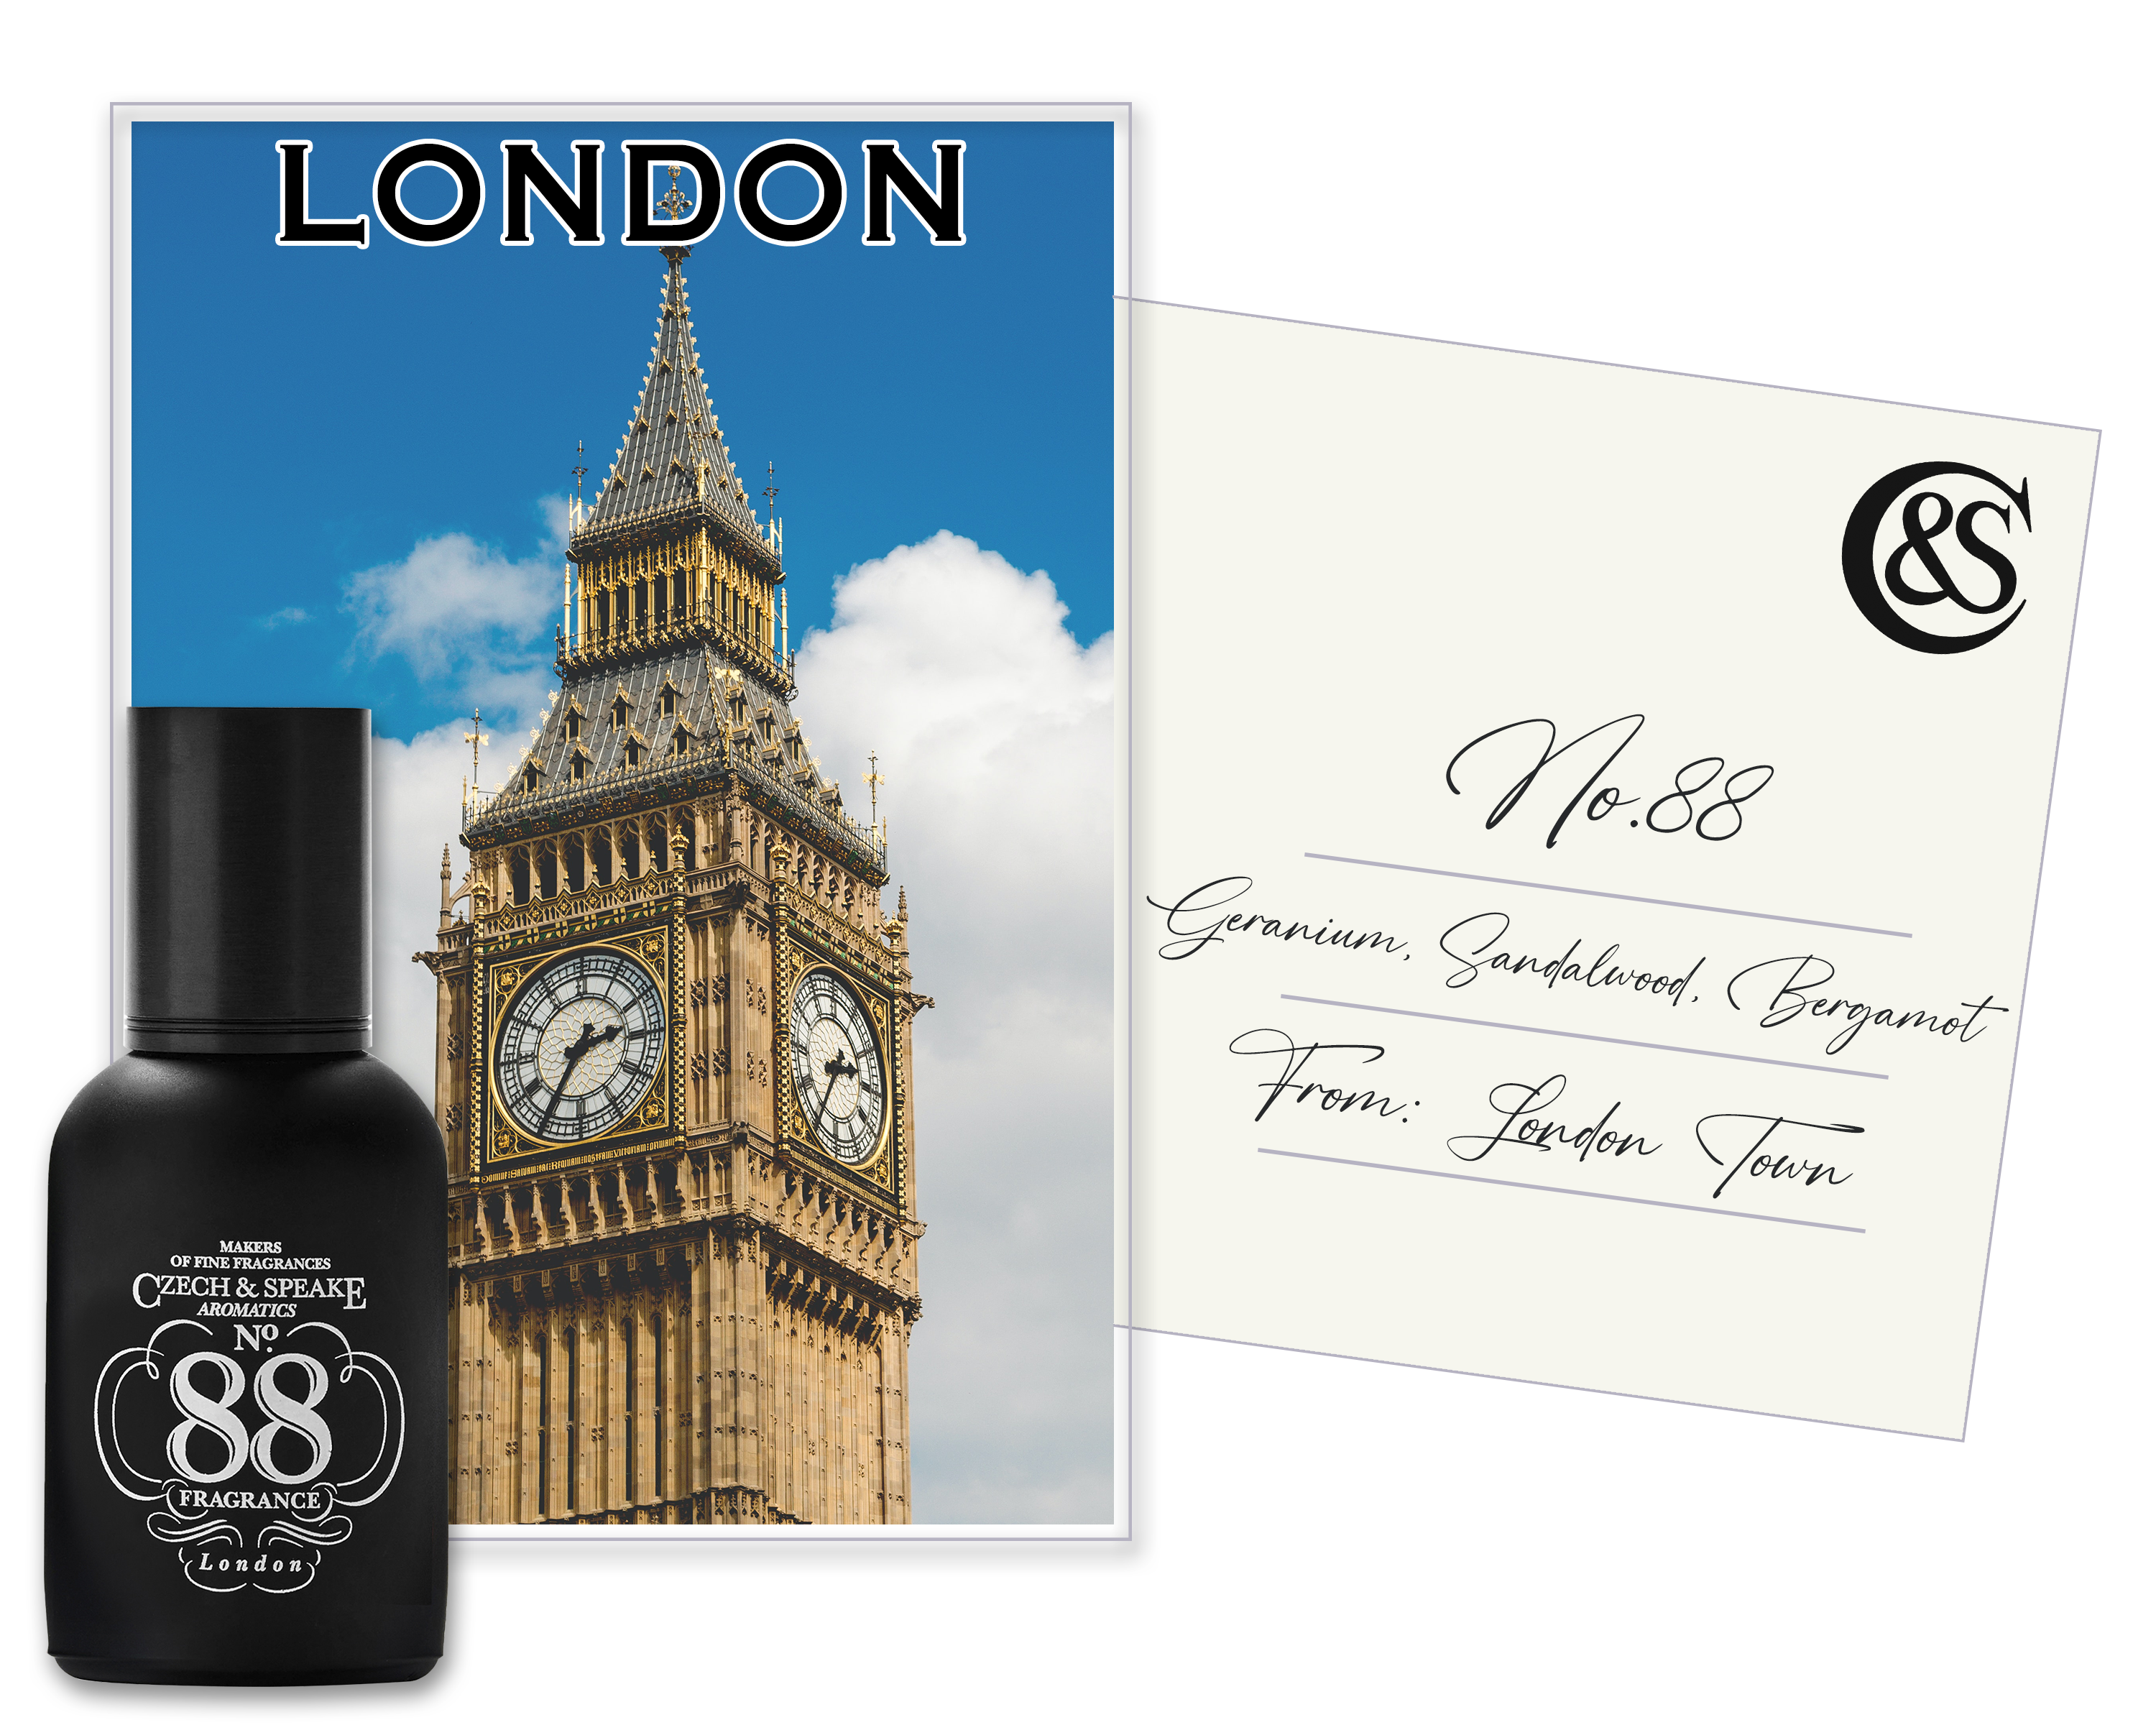 No.88 Cologne 50ml bottle, overlaid to left of London postcard, with No.88, fragrance notes, and destination on reverse.